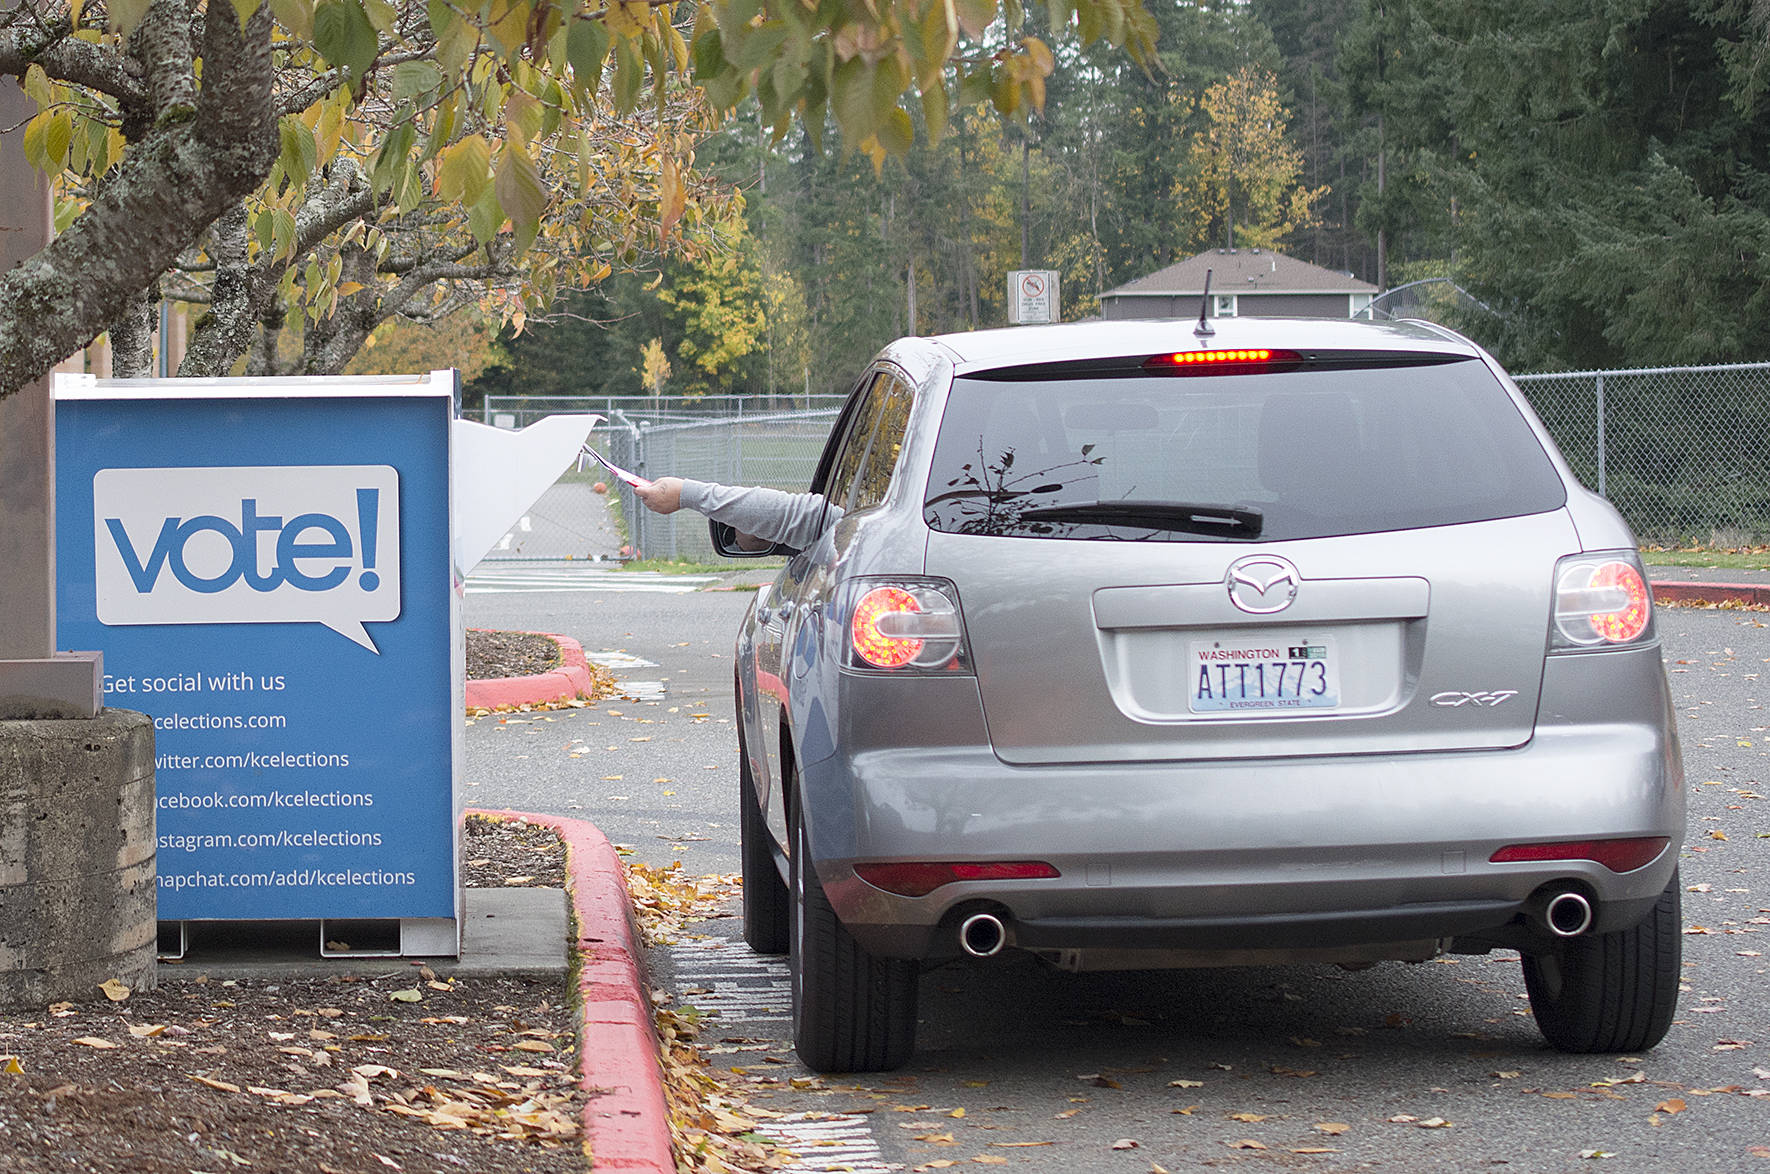 A voter drops of their ballot at a drop off box in Maple Valley for the November 2017 election. File photo by Kayse Angel